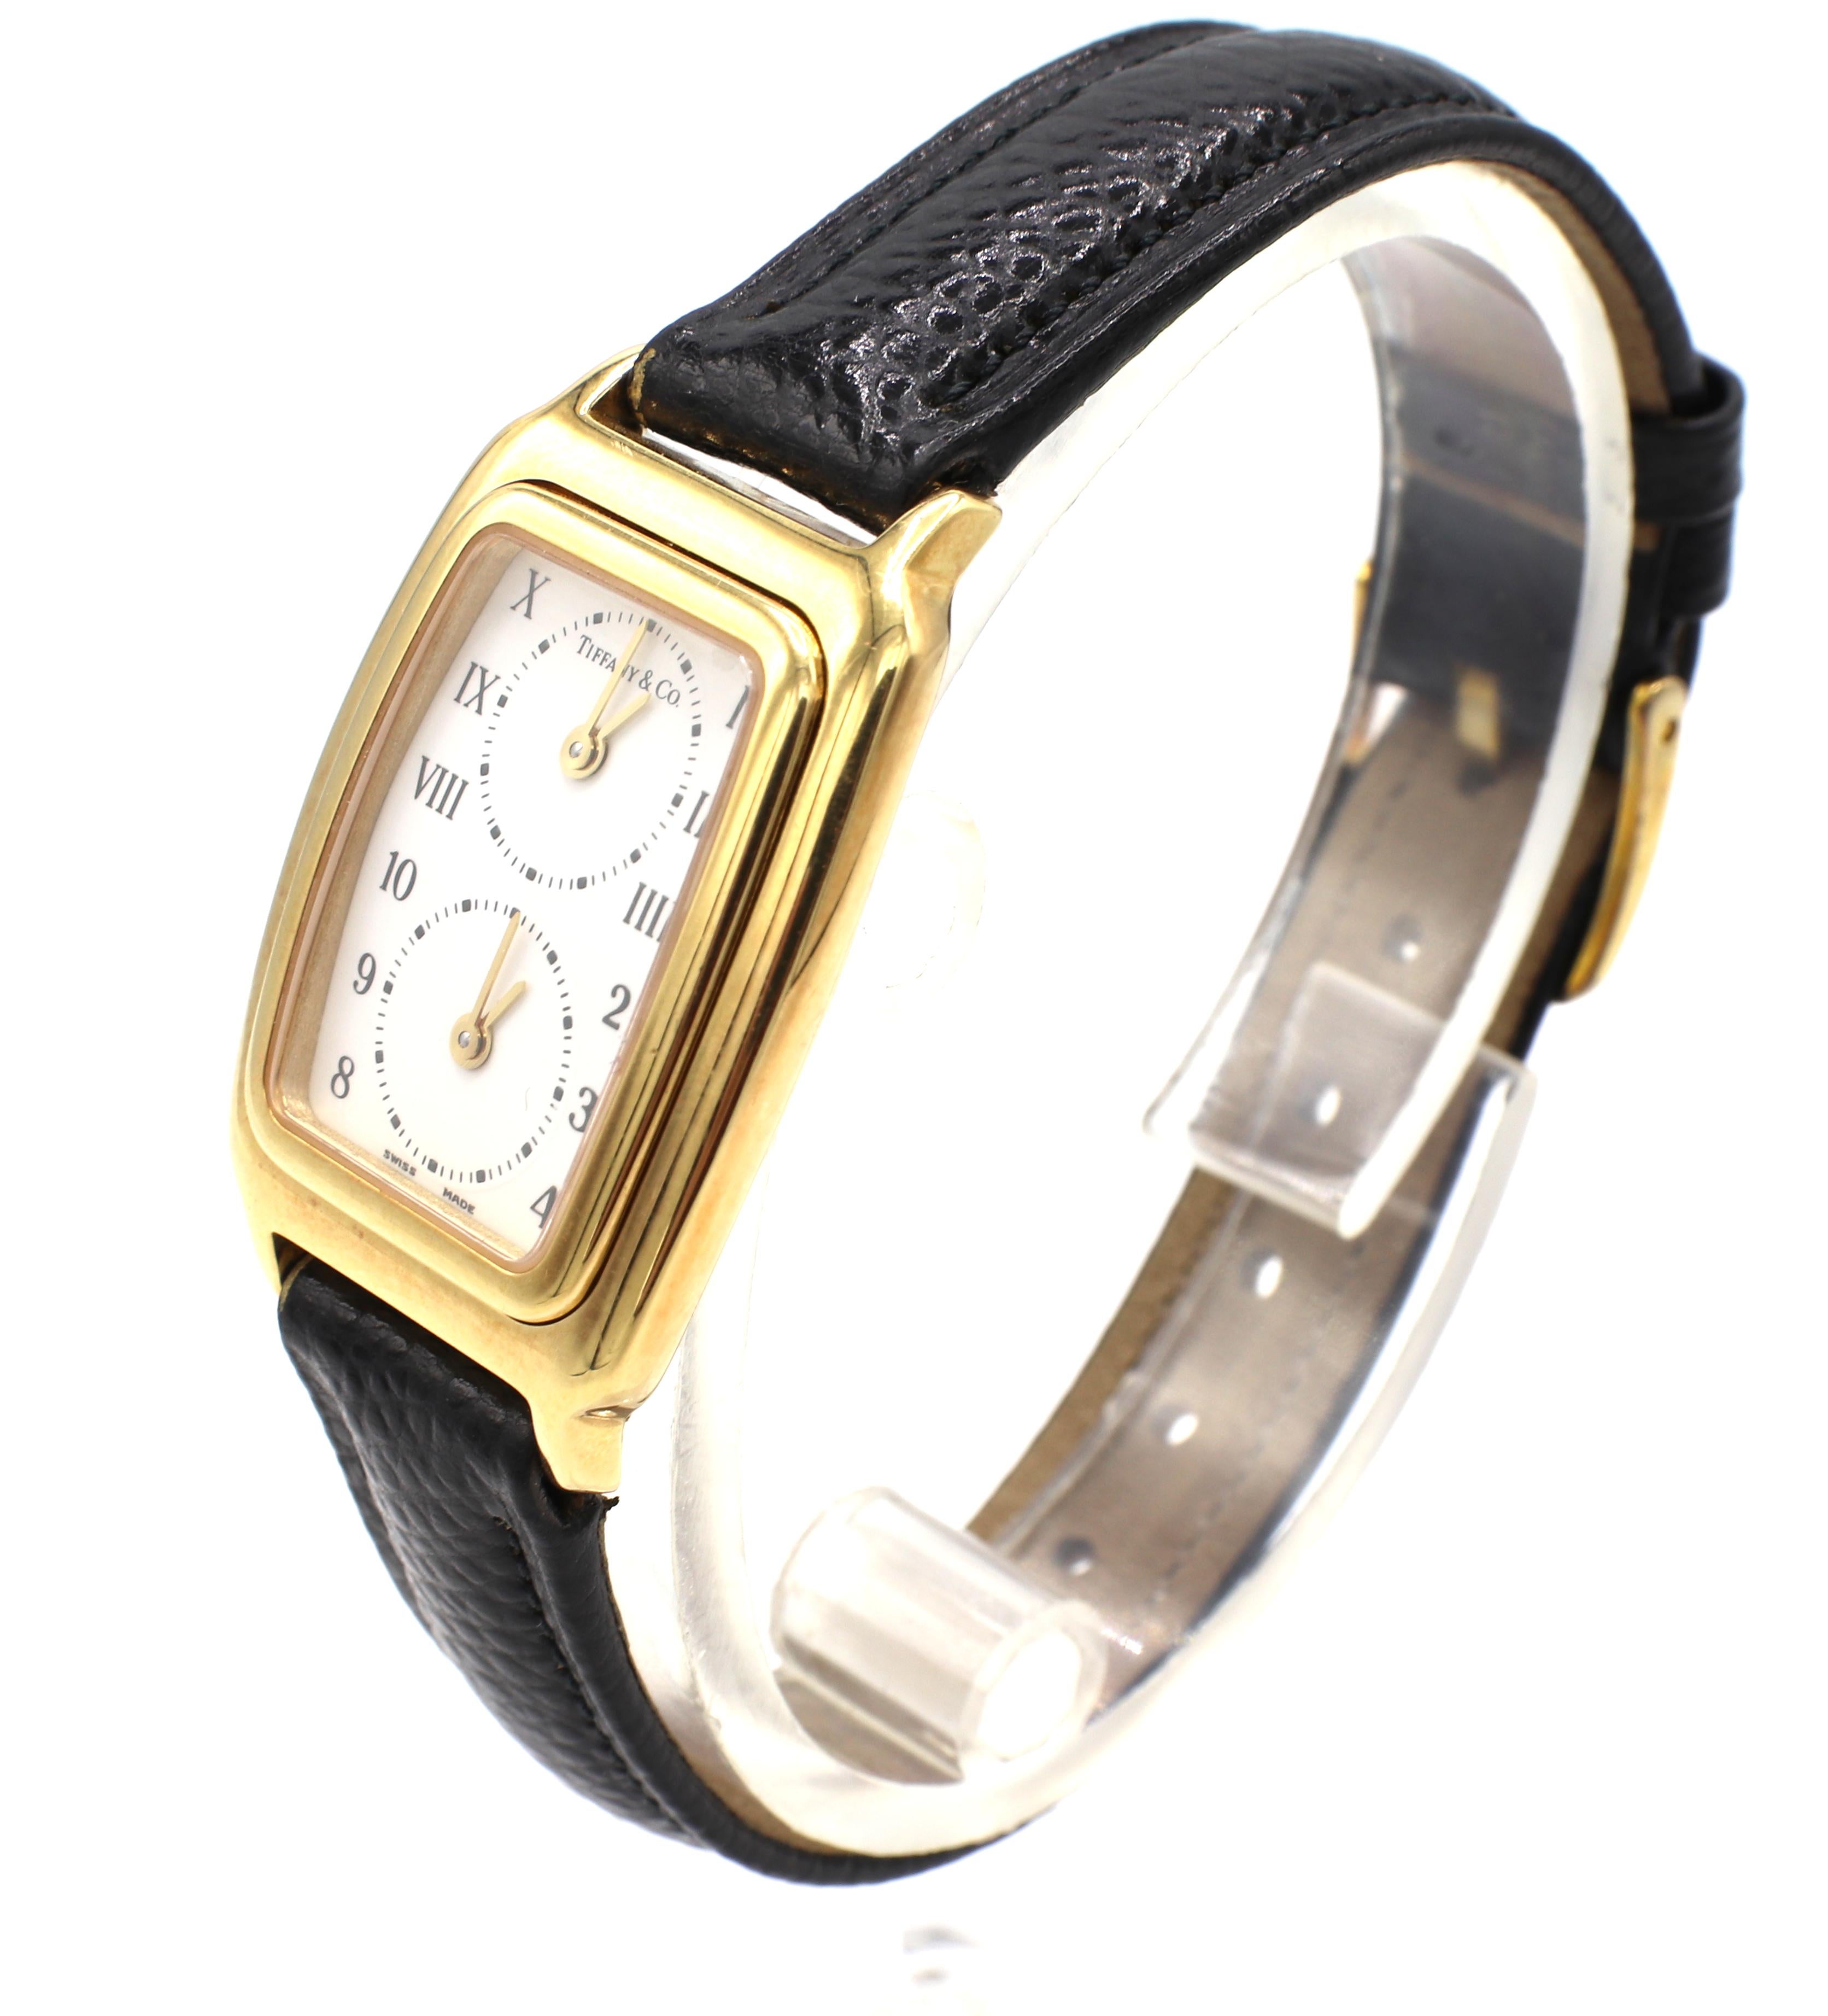 Tiffany & Co. 18 Karat Gold Dual Time Zone Watch
Metal: 18k yellow gold
Weight: 29.2 grams
Band: Black leather
Dial: White
Case: 18k yellow gold, hinged pop-out 22 x 34mm
Model: L203
Water resistant
Movement: Quartz
Crystal: Sapphire
Signed: